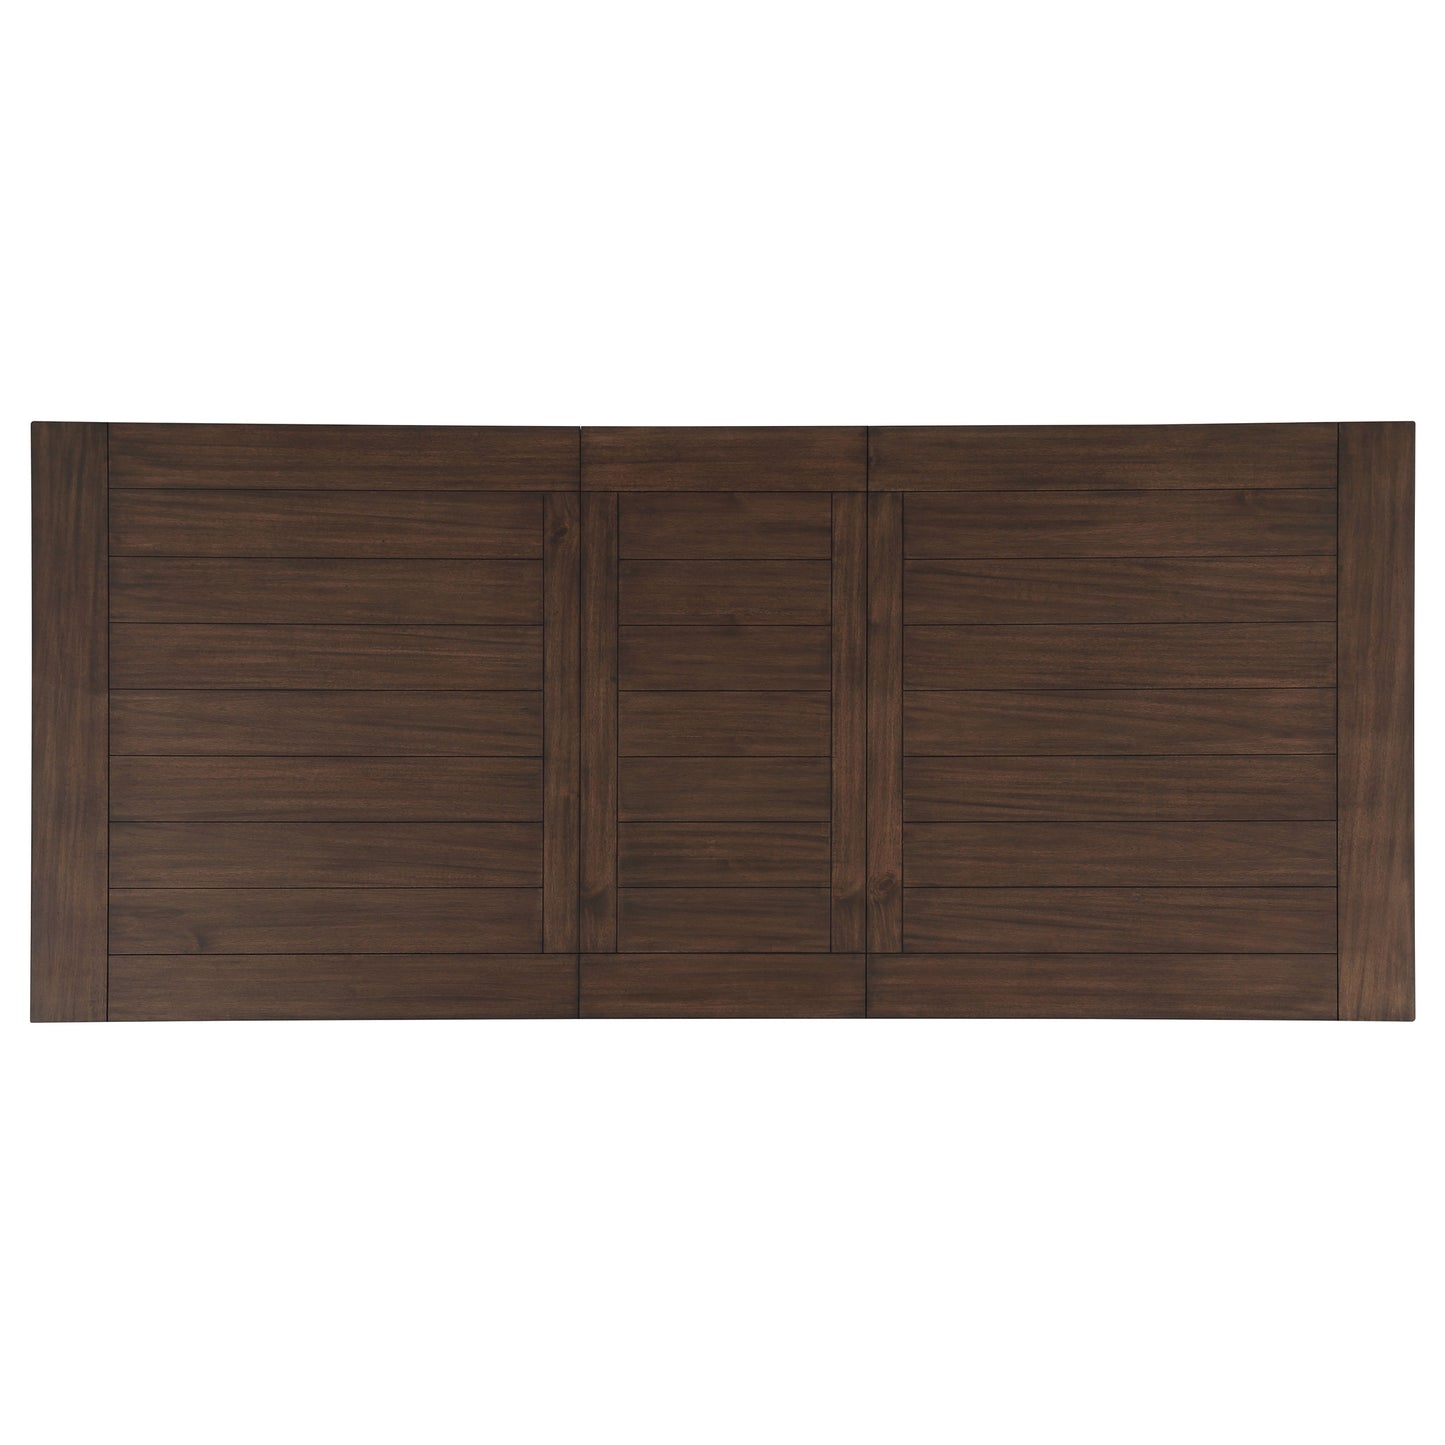 Madelyn Dining Table with Extension Leaf Dark Cocoa and Coastal White